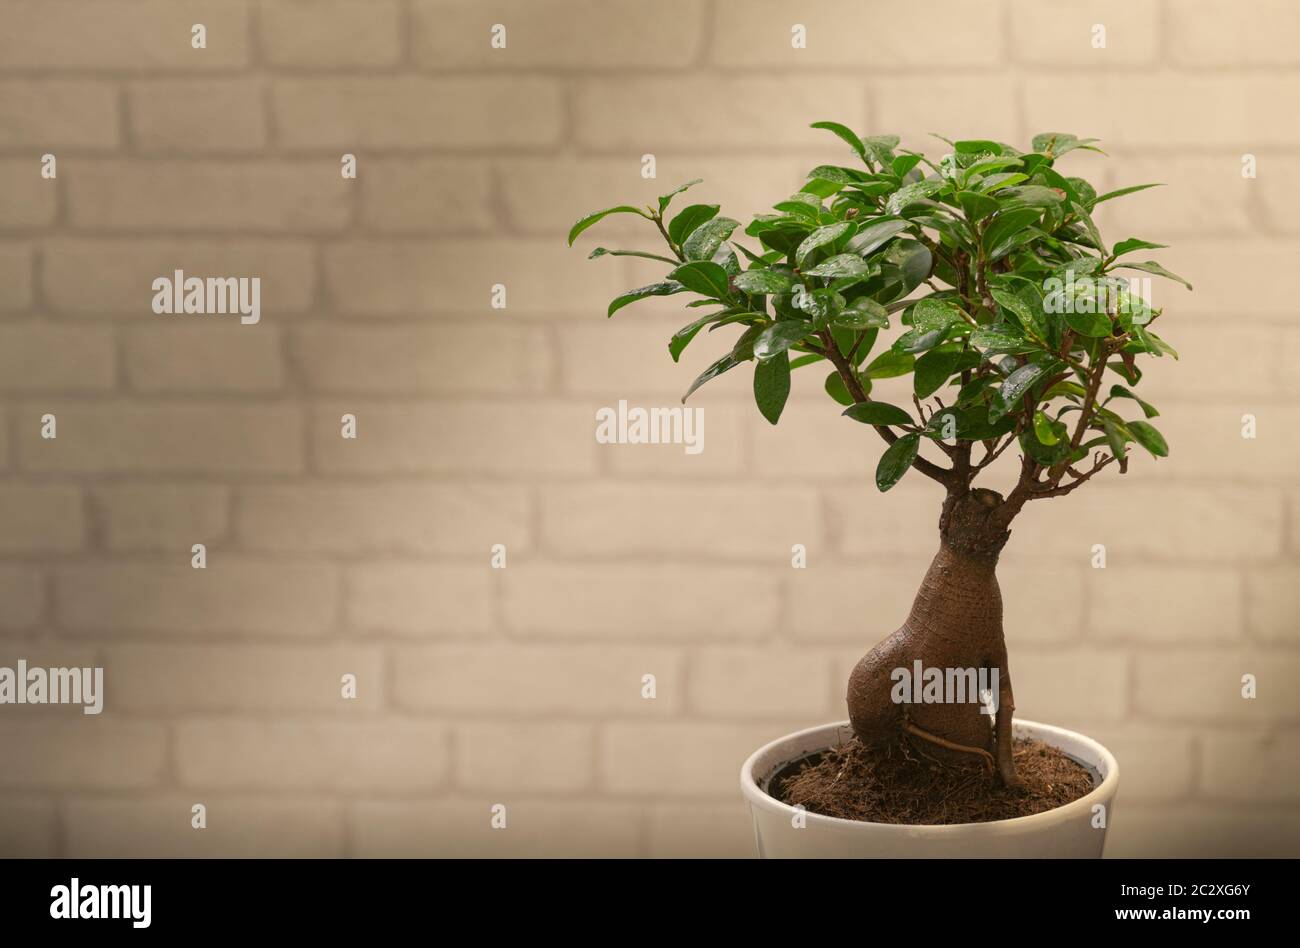 Ginseng Bonsai Tree in front of white brick wall Stock Photo